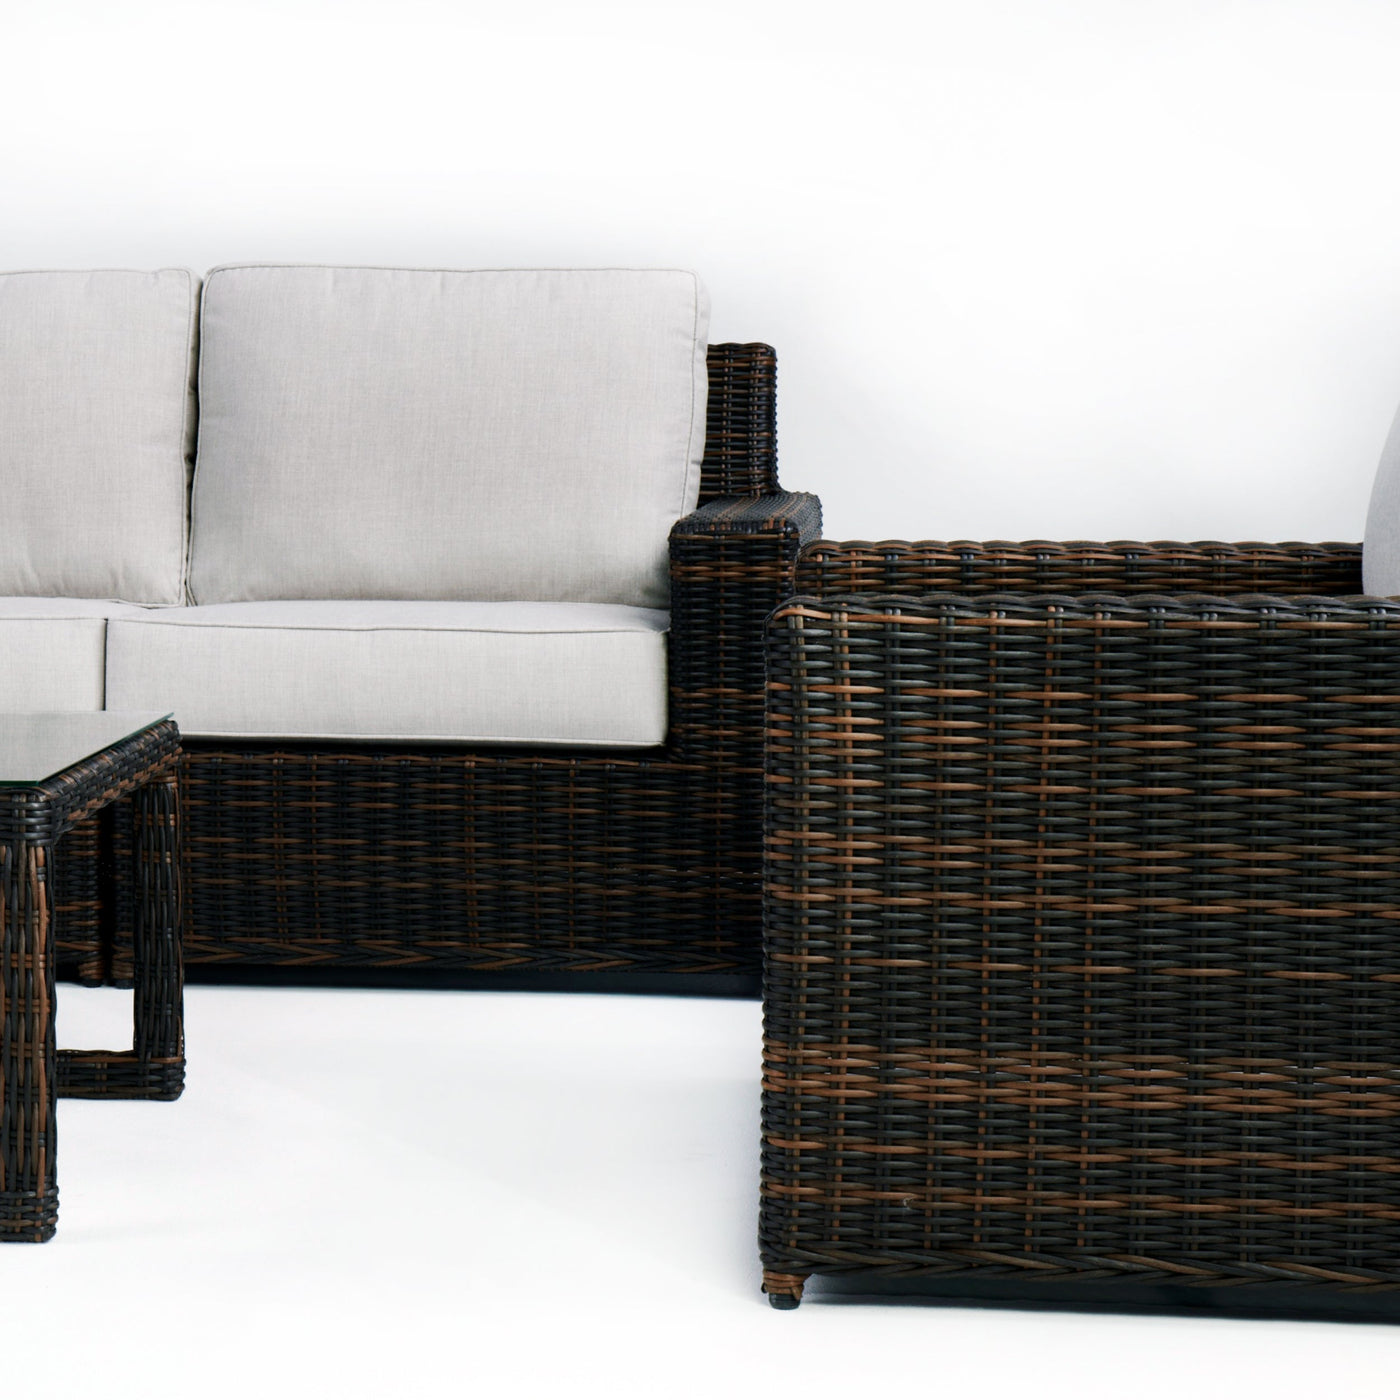  Yardbird Langdon Outdoor Loveseat Set with Fixed Chairs Outdoor Furniture